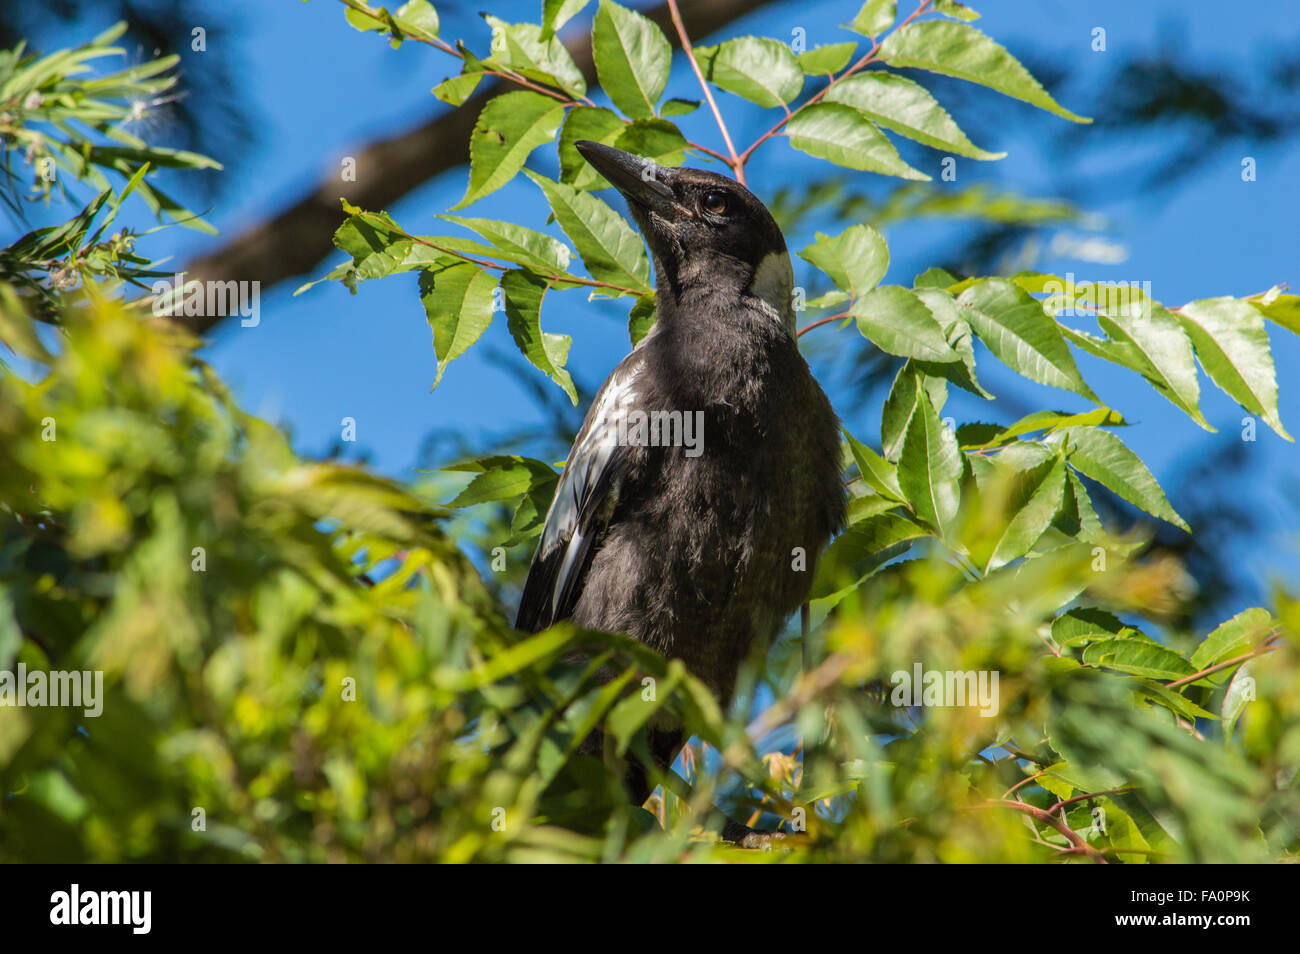 Cracticus tibicen.  A baby Magpie in a tree.  A Fledgling. Stock Photo